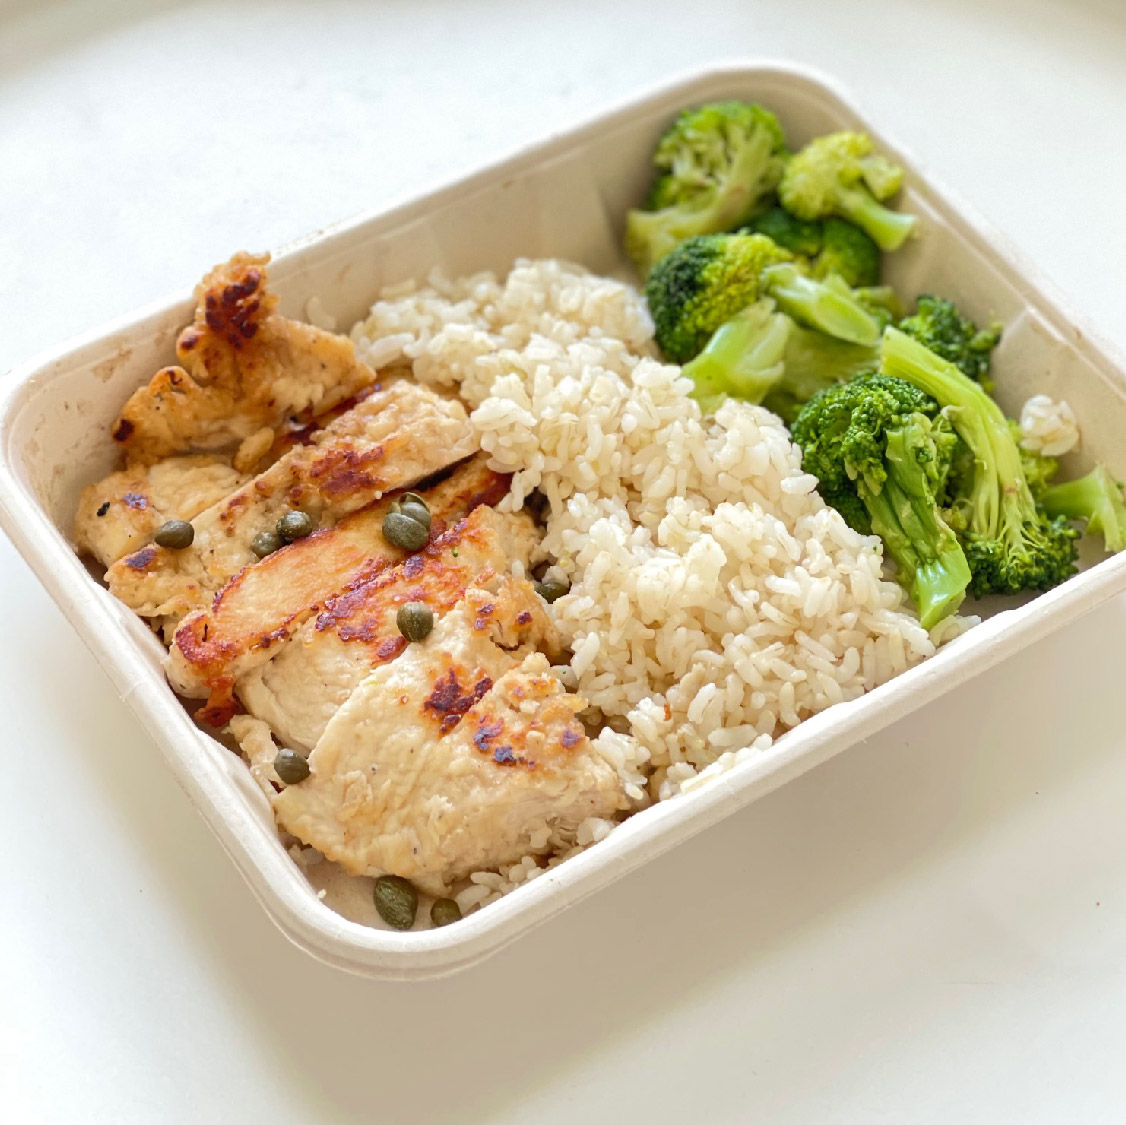 A photo of grilled chicken piccata with rice and steamed broccoli in a tan paper container..